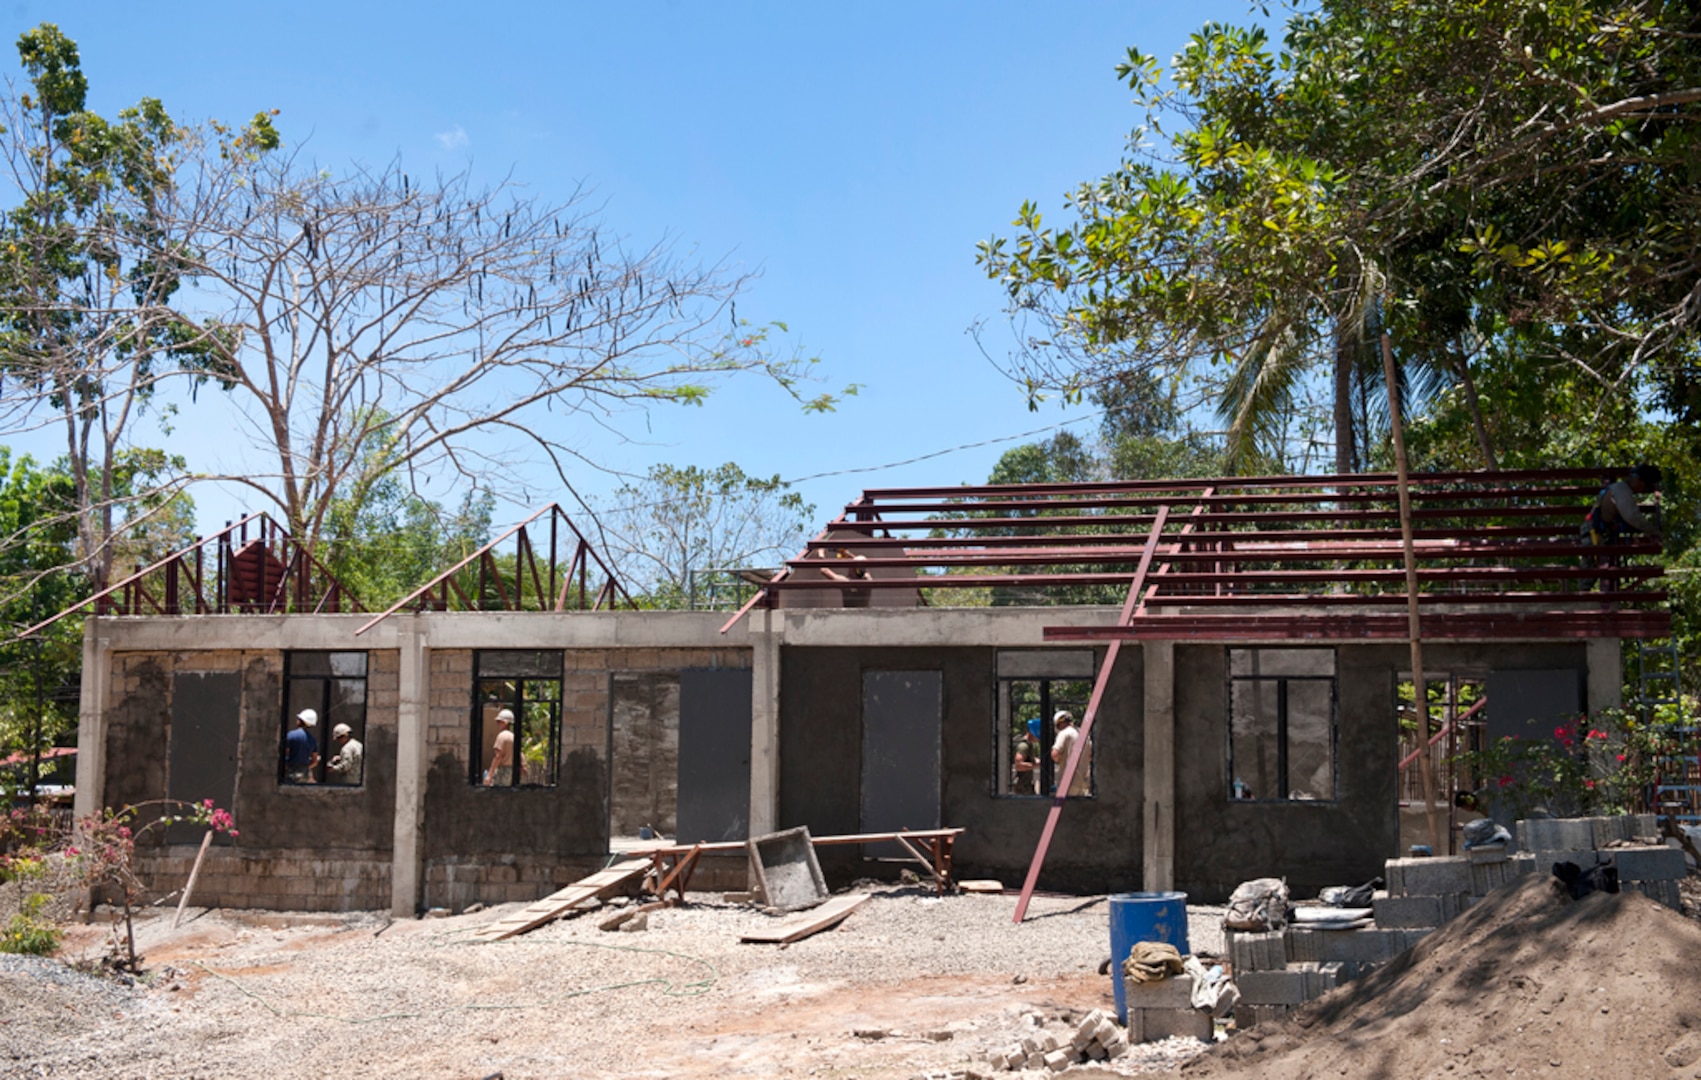 PUERTO PRINCESA, PALAWAN, Philippines (Apr. 21, 2015) - Service members of the U.S. military, Australian Army and Philippine Air Force work together to construct a two classroom Department of the Philippines Standard Building at ENCAP Site 1, Santa Lourdes National High School during exercise Balikatan.  The joint and multinational team consists of service members with the U.S. Army, U.S. Navy, U.S. Marines, Australian Army, and Philippine Air Force. This year marks the 31st iteration of the exercise, which is an annual Philippines-U.S. bilateral military training exercise and humanitarian civic assistance engagement. 